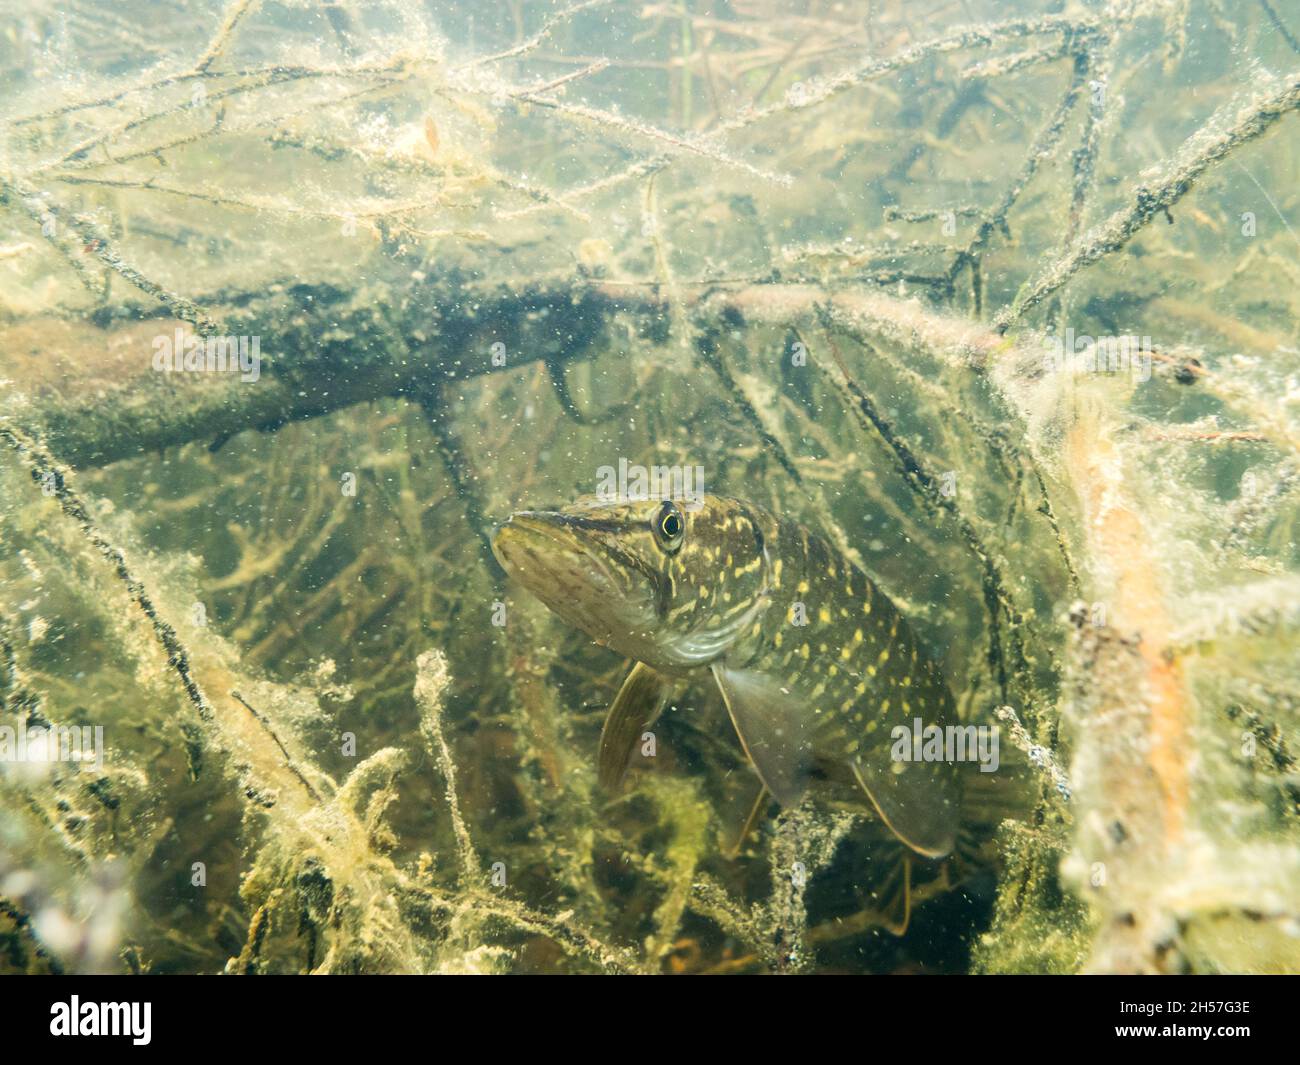 Underwater shot of Northern pike hiding among tree branches Stock Photo